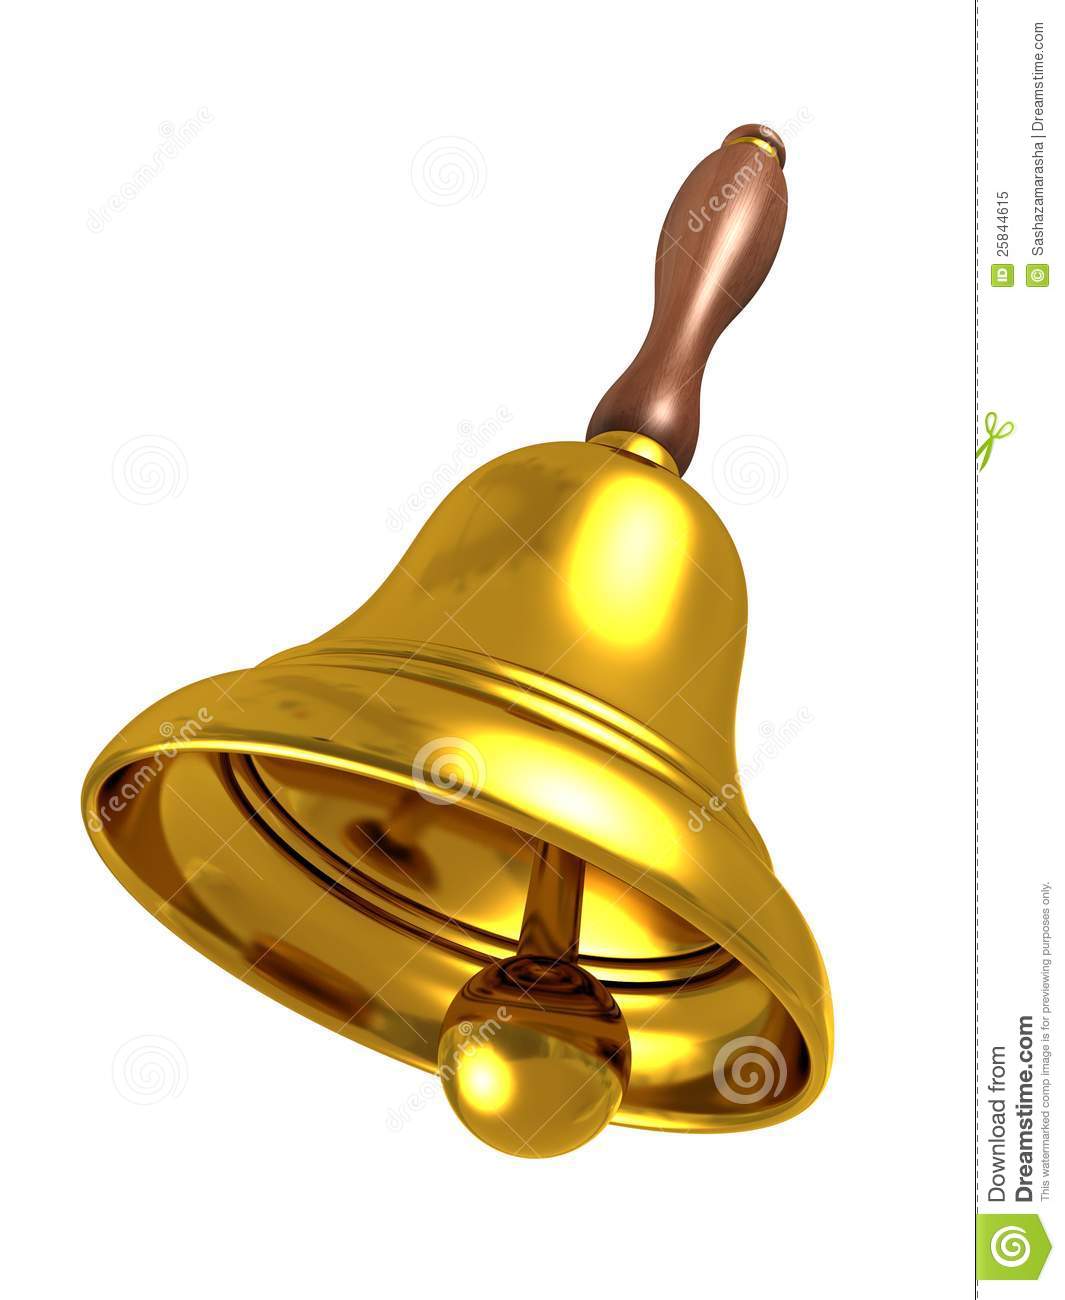 School Golden Bell On White Background Royalty Free Stock Photo